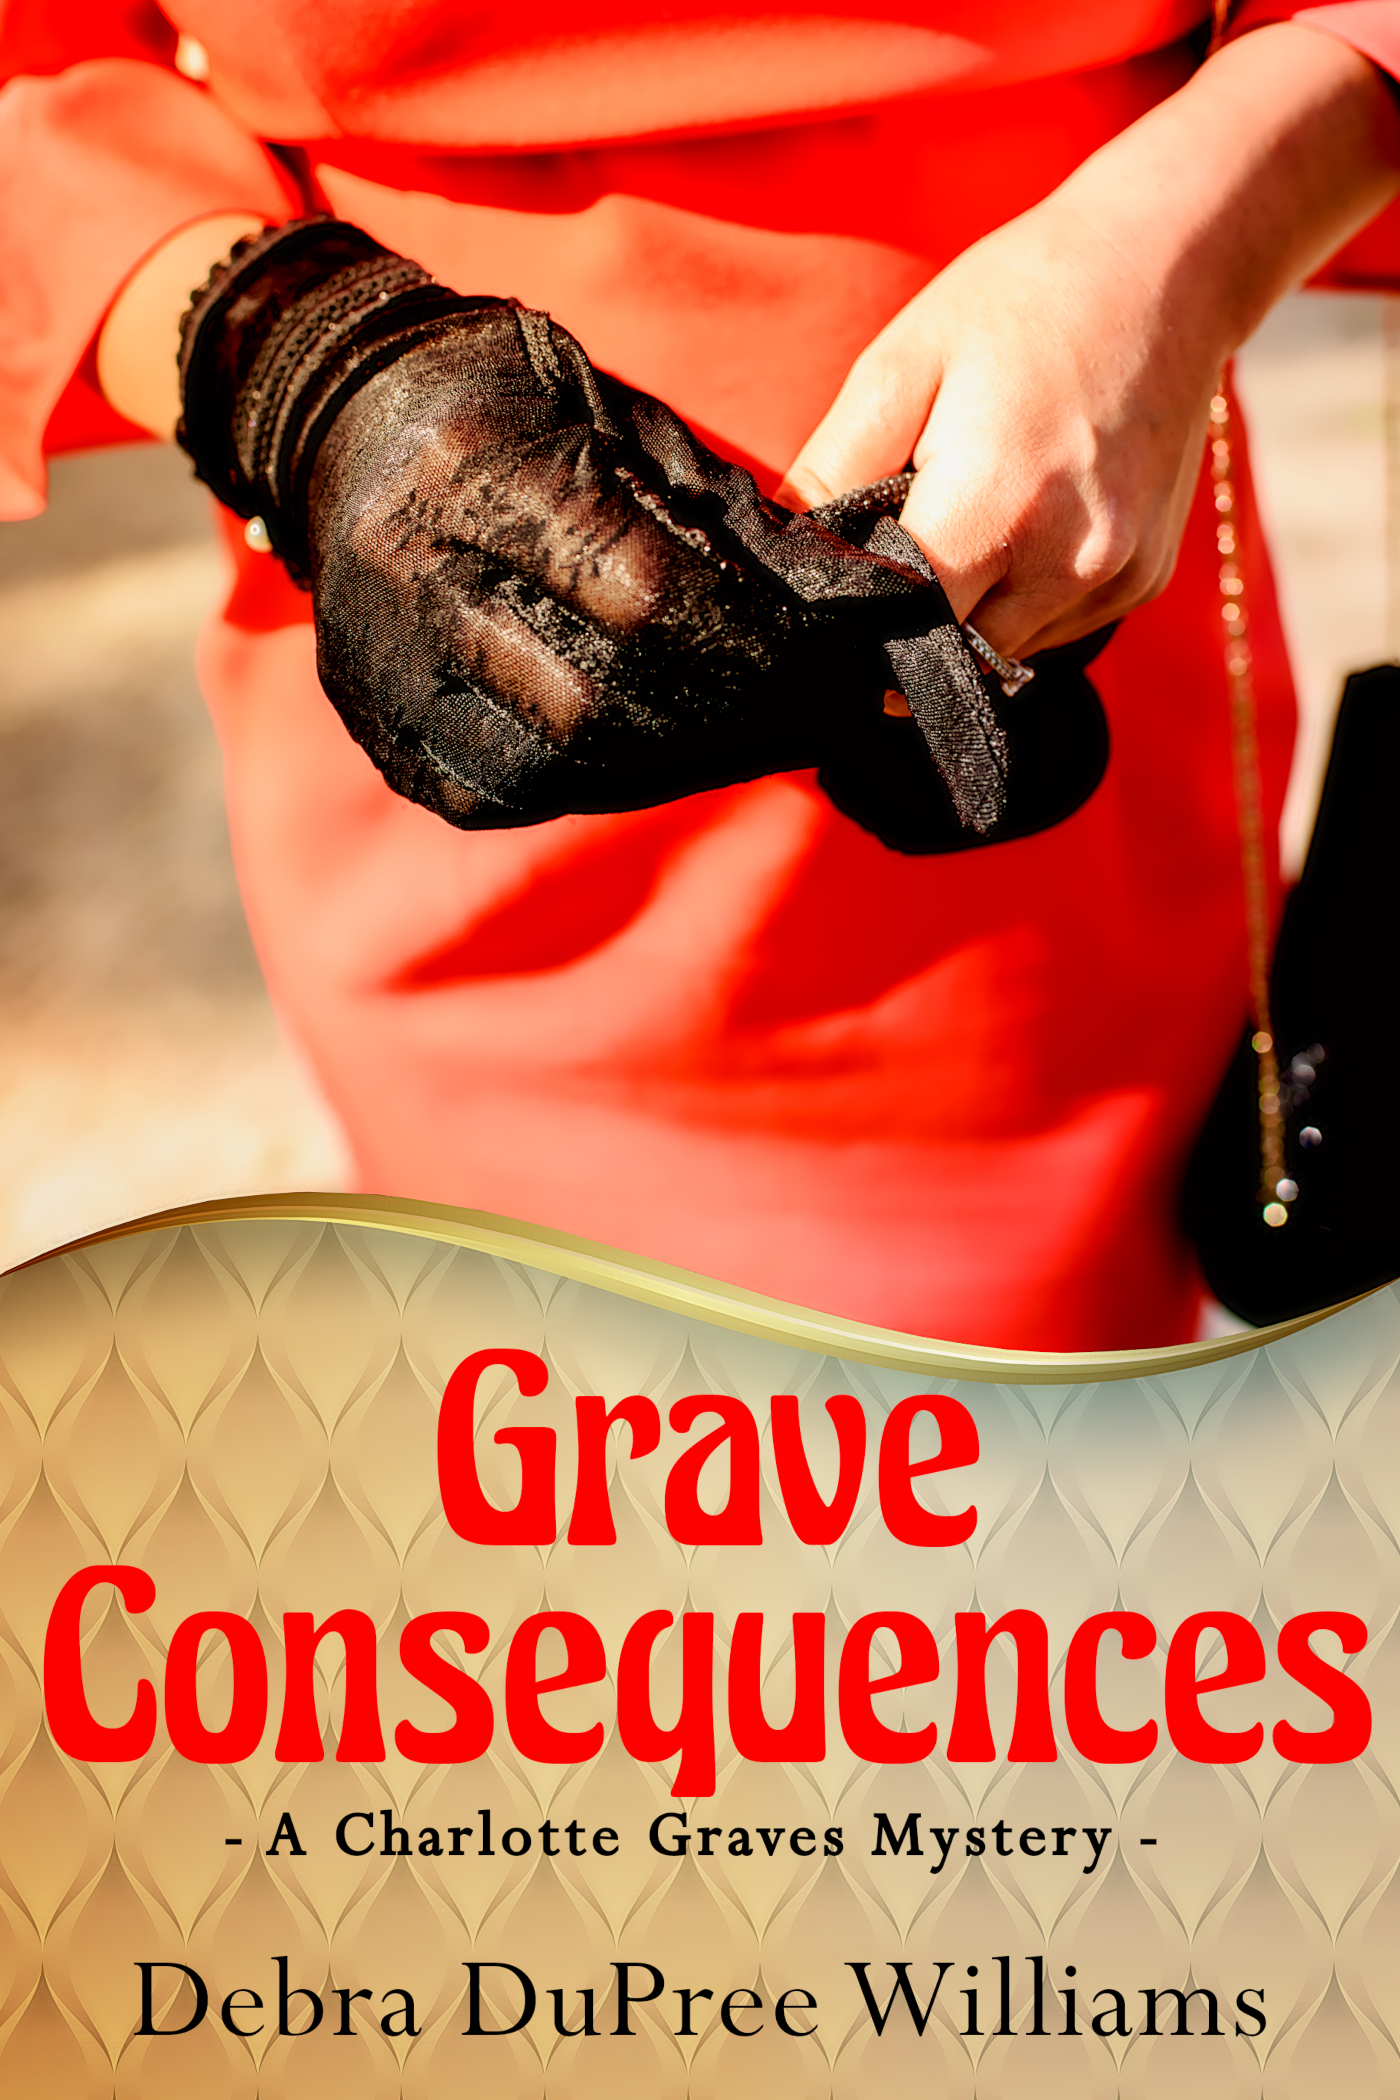 Photo of book Grave Consequences